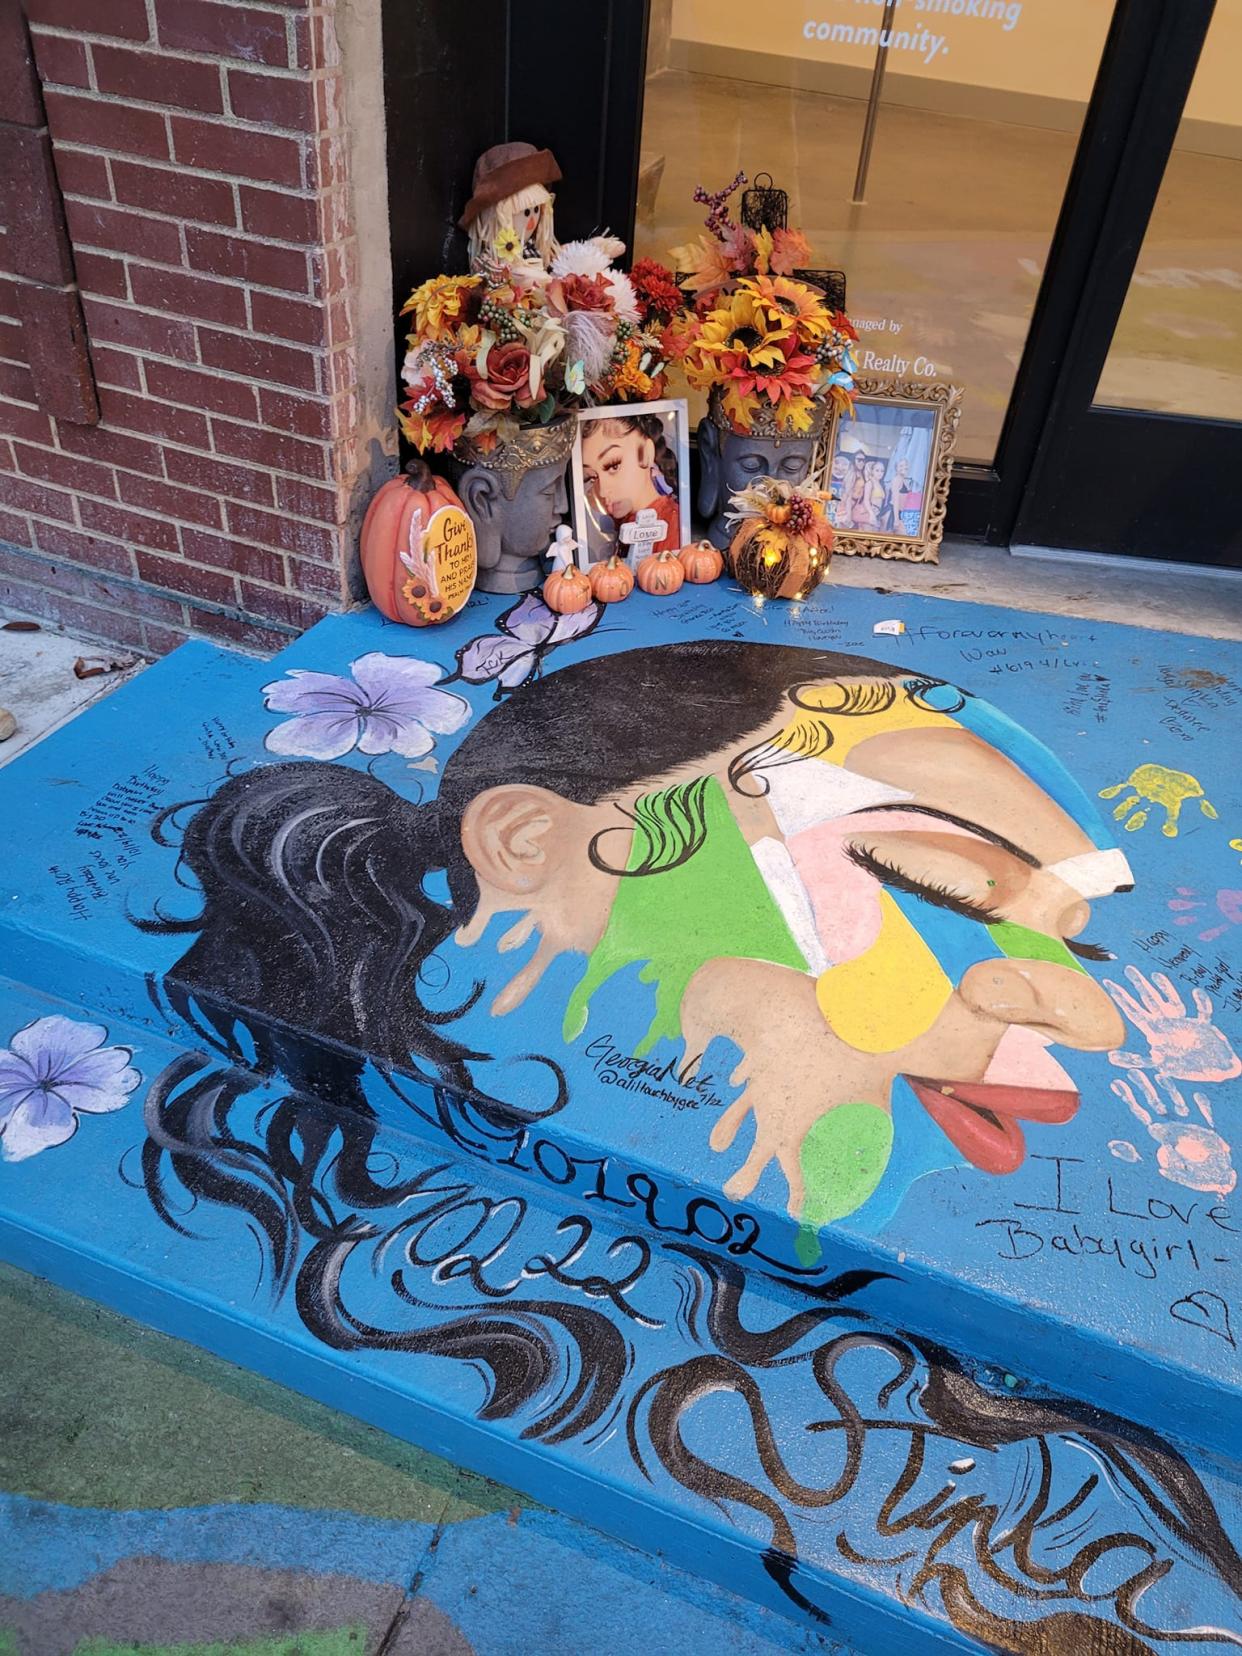 After weeks of uncertainty, the memorial to 19-year-old Toni Knight has found its forever home at the entrance to the ArtistSpace Lofts in downtown Petersburg. It now rests next to a mural that was painted on the sidewalk shortly after Knight was killed as she walked into the building July 2, 2022.